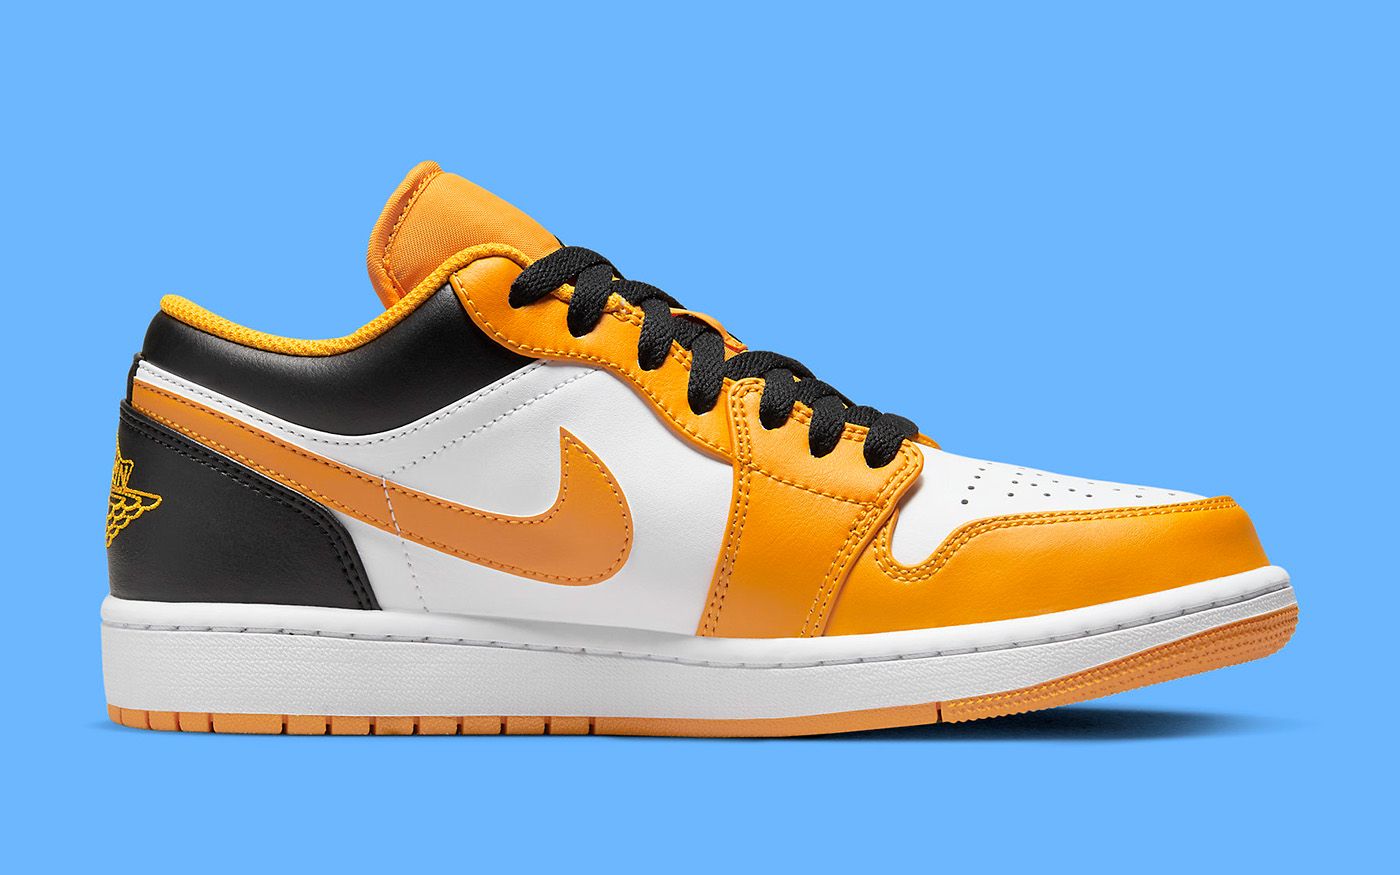 Official gold and white jordan 1 Images // Air Jordan 1 Low "University Gold" | HOUSE OF HEAT